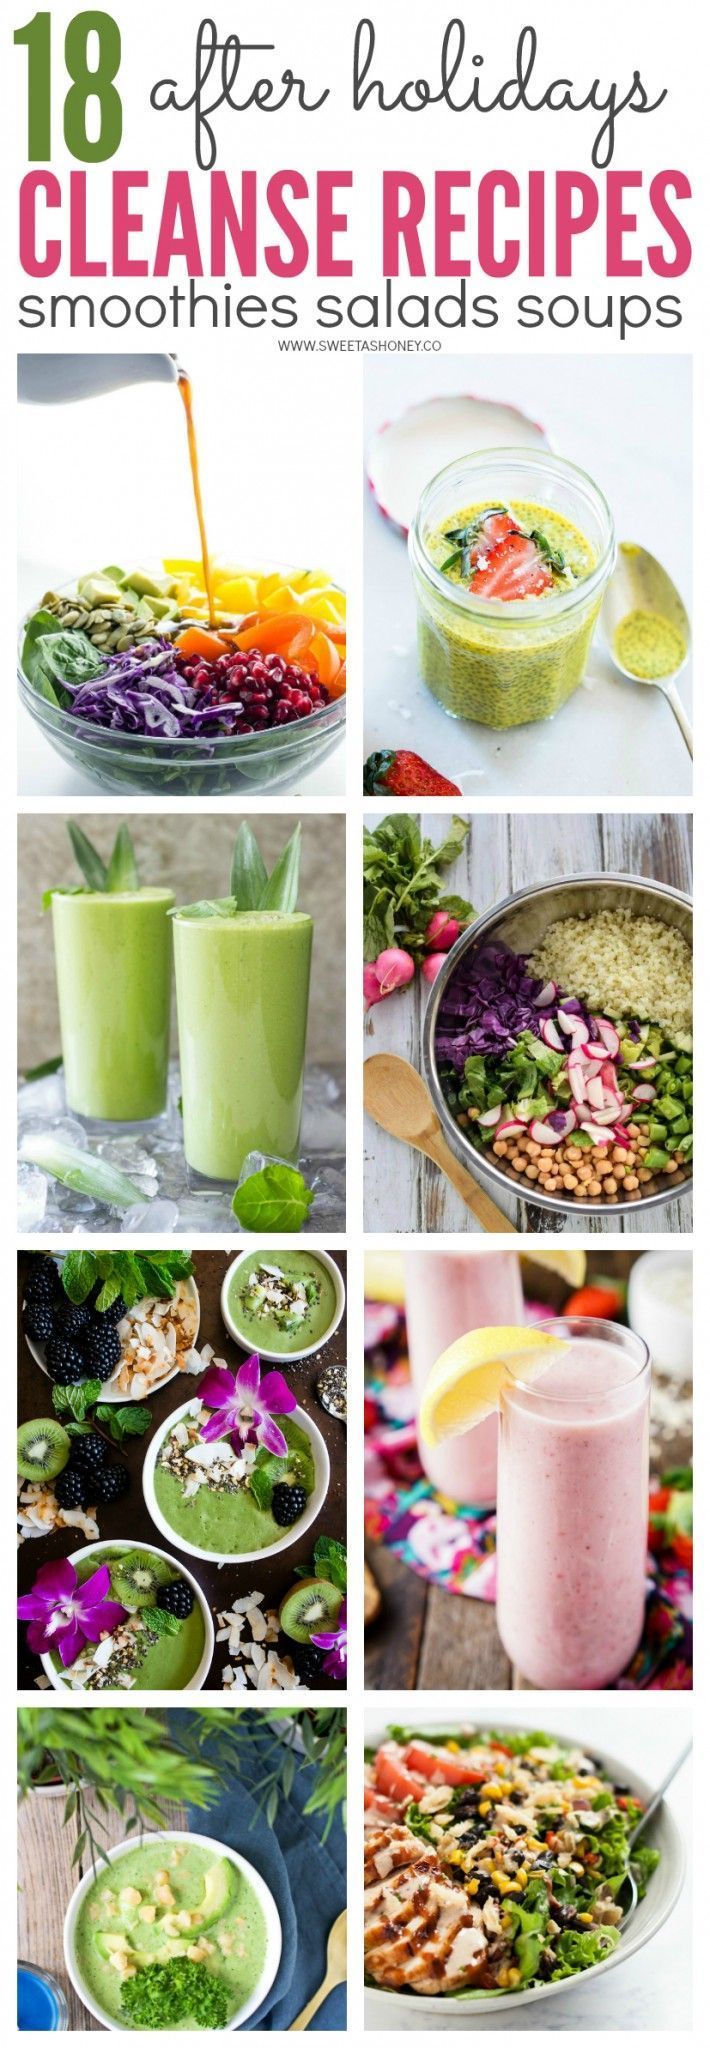 18 after holidays cleanse recipes.Juice, soup, smoothie, clean eating recipes to detox to lose weight after Christmas and New Year. -   25 cleanse diet meals
 ideas